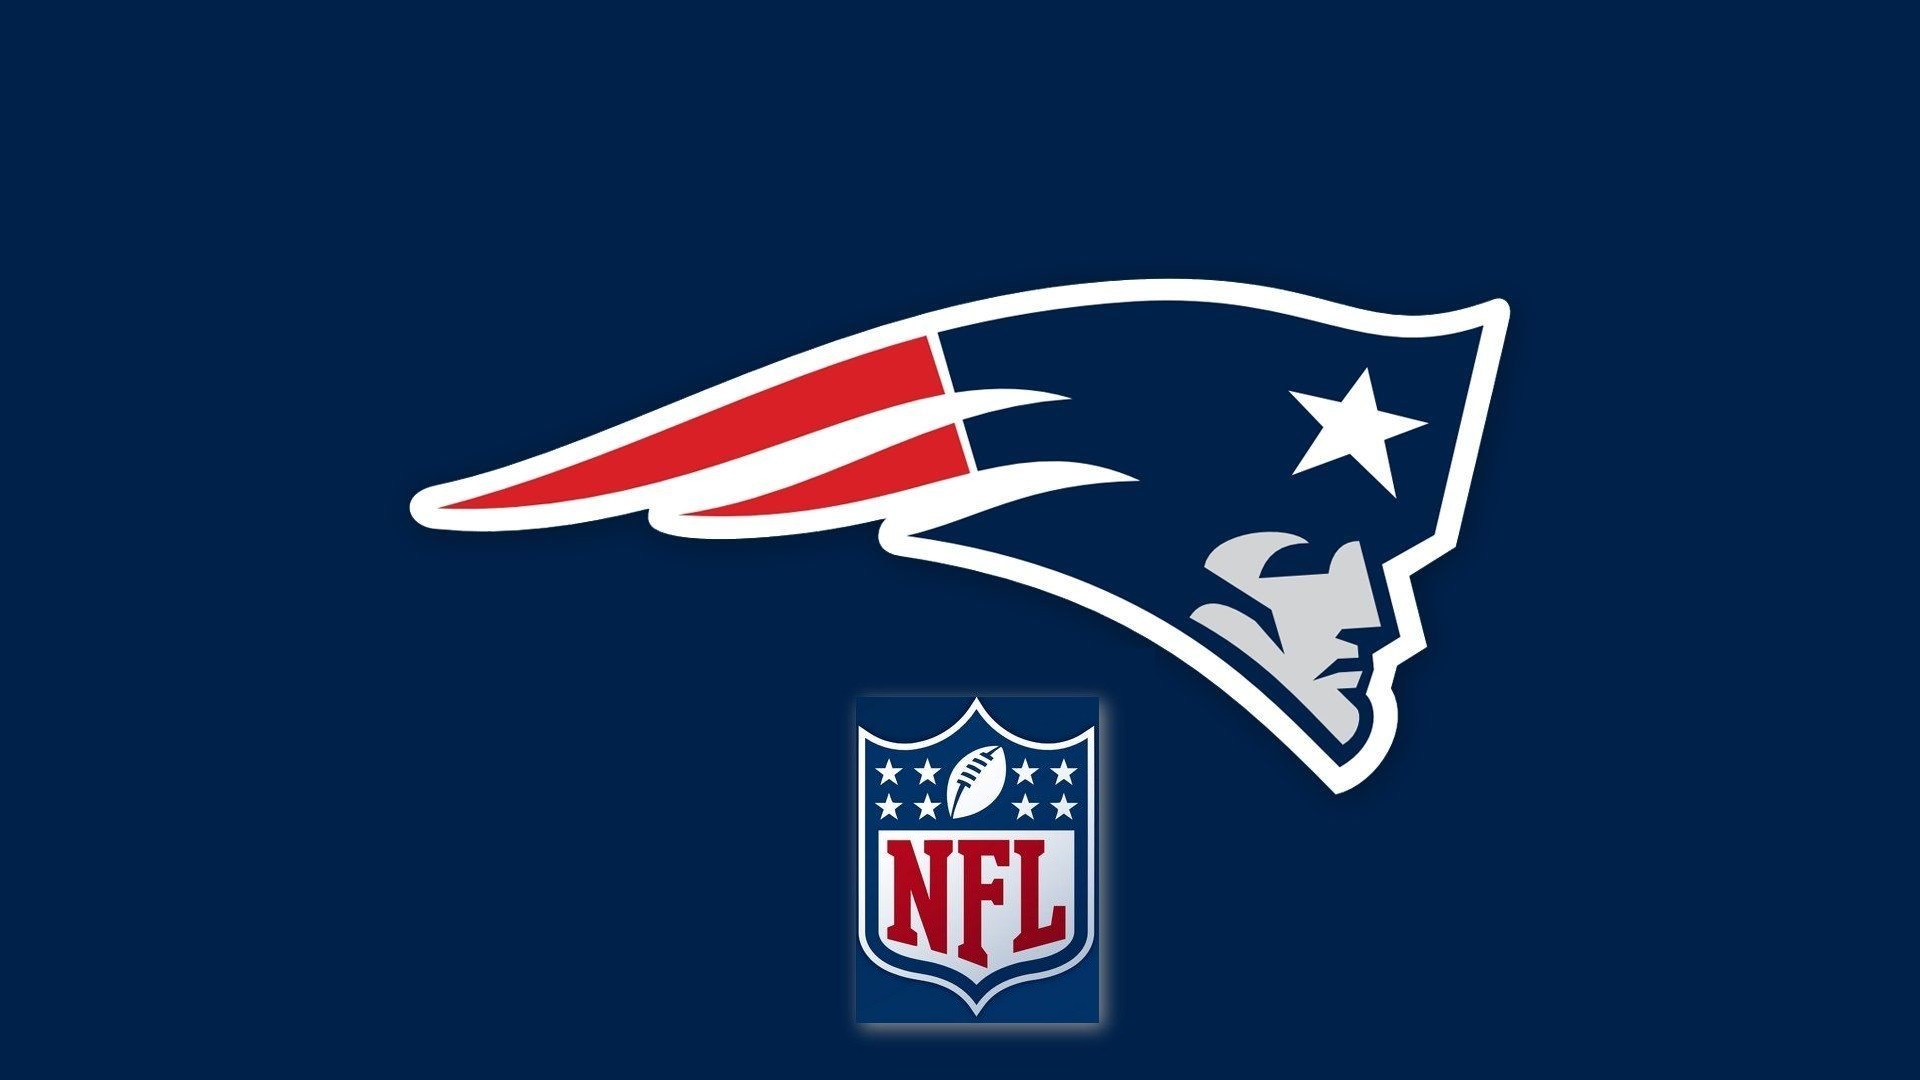 New England Patriots NFL Wallpaper HD With high-resolution 1920X1080 pixel. Download and set as wallpaper for Desktop Computer, Apple iPhone X, XS Max, XR, 8, 7, 6, SE, iPad, Android